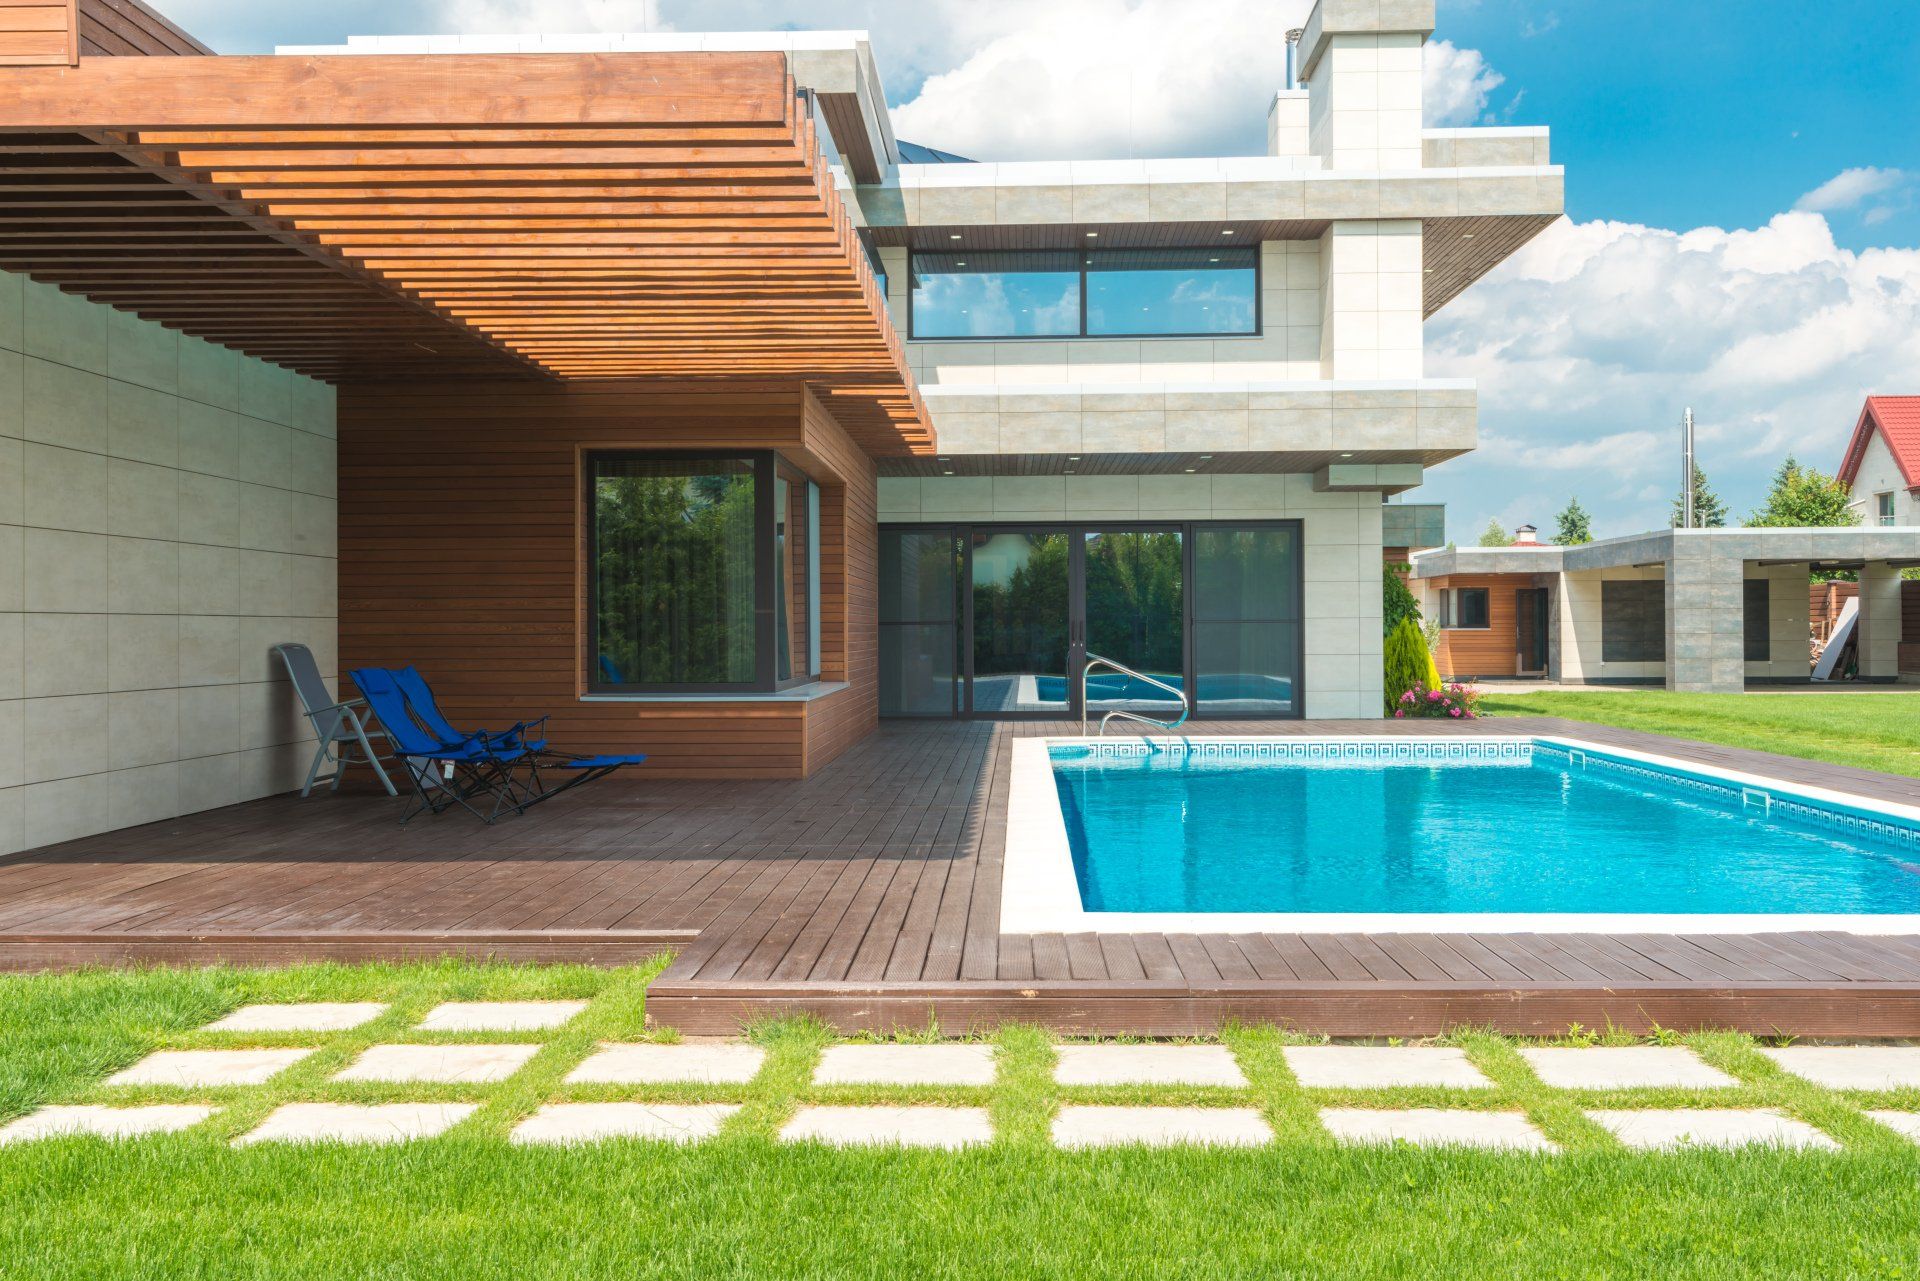 backyard pool and grass with walkway and wooden patio